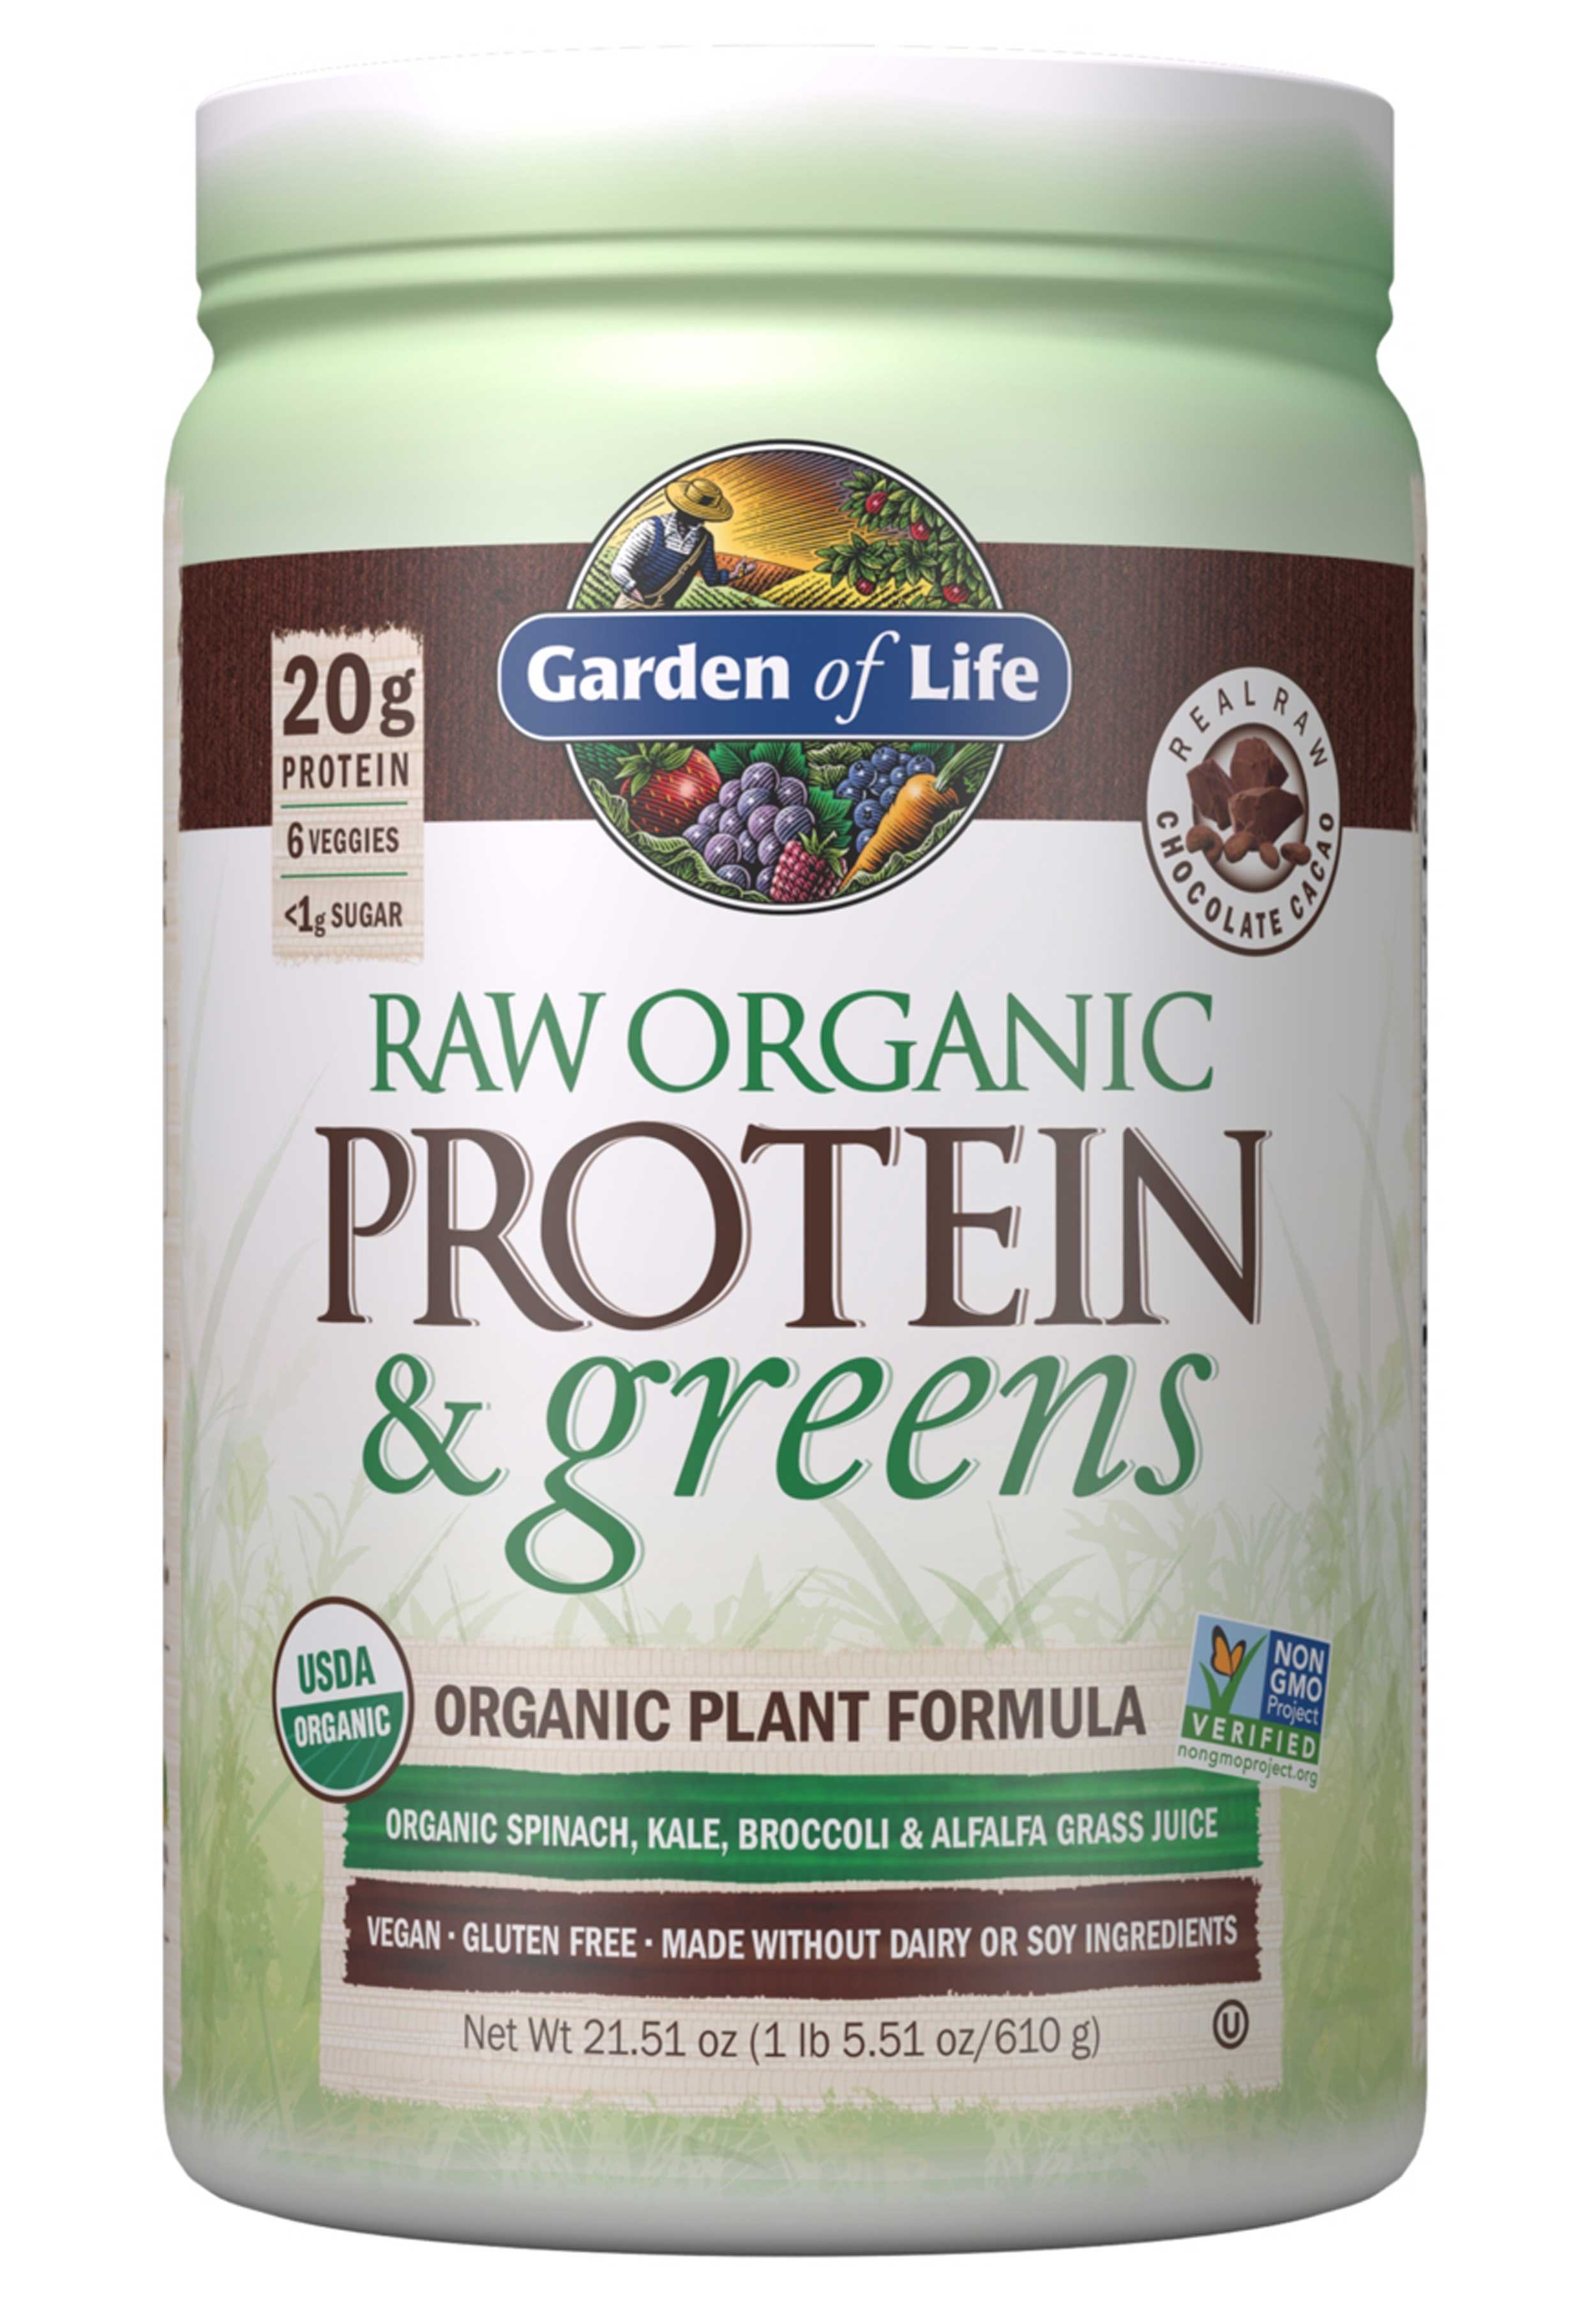 Garden of Life Raw Organic Protein and Greens Powder